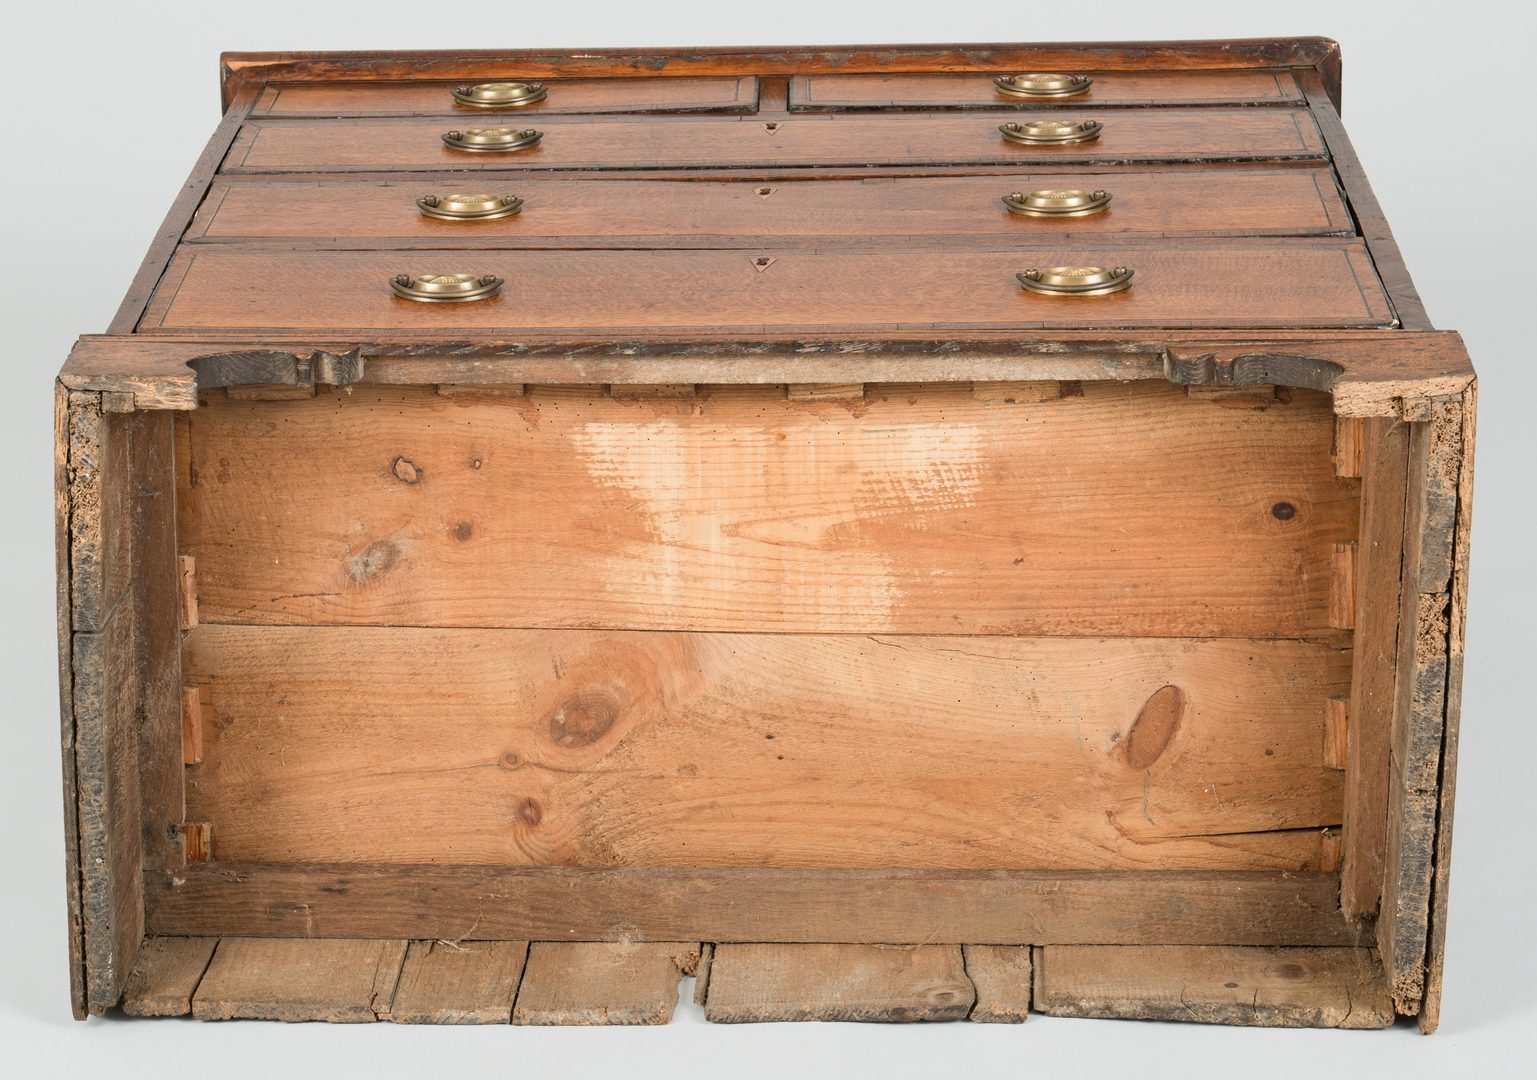 Lot 96: Inlaid Oak Chest of Drawers, 18th c.